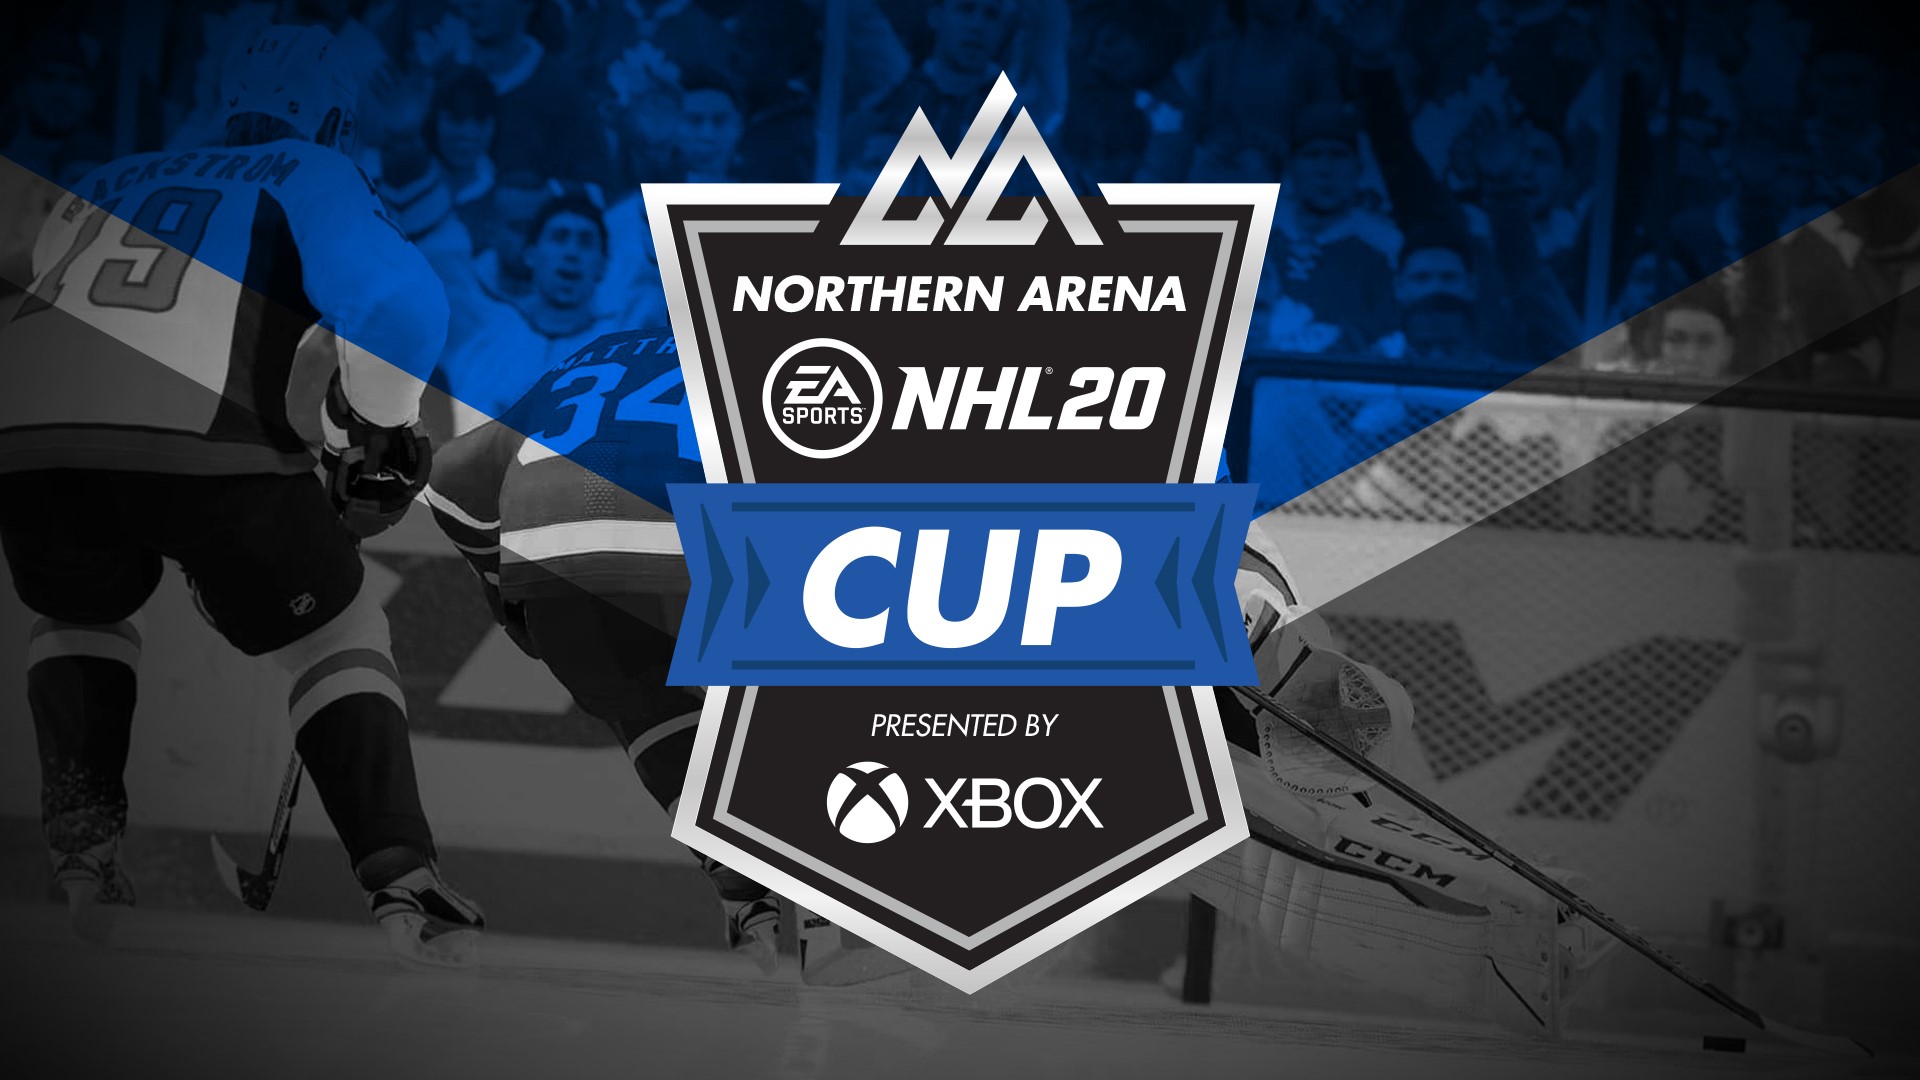 Video For Xbox Giving NHL Fans a Reason to Cheer with Northern Arena EA Sports NHL 20 Cup